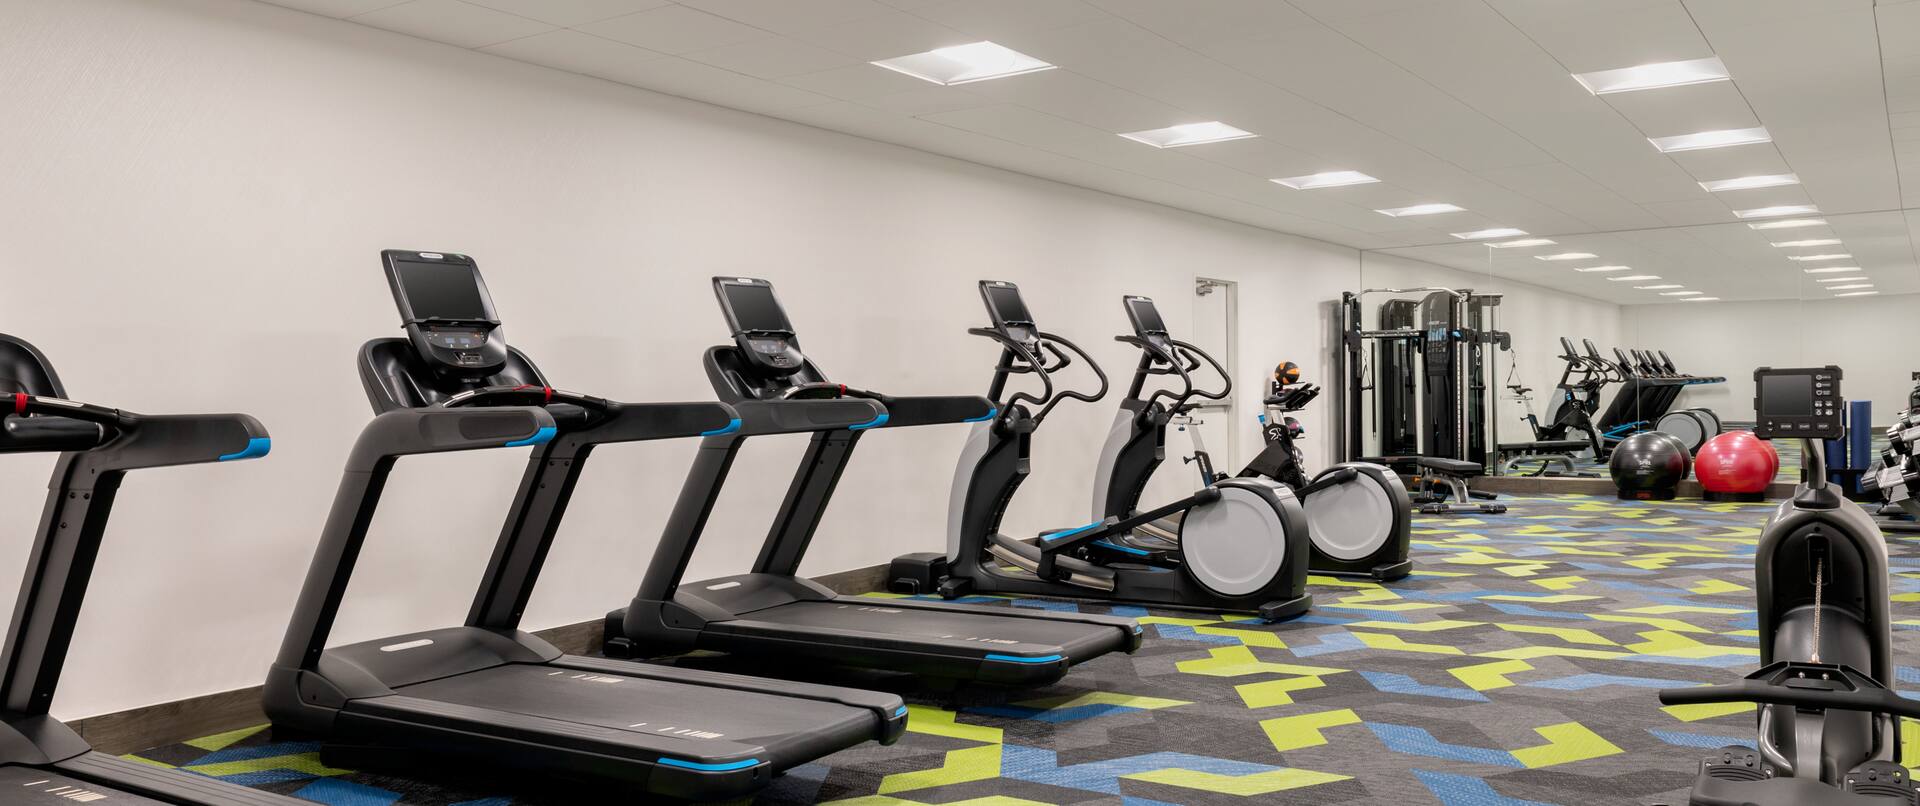 Fitness Center with Treadmills Recumbent Bikes and Exercise Balls